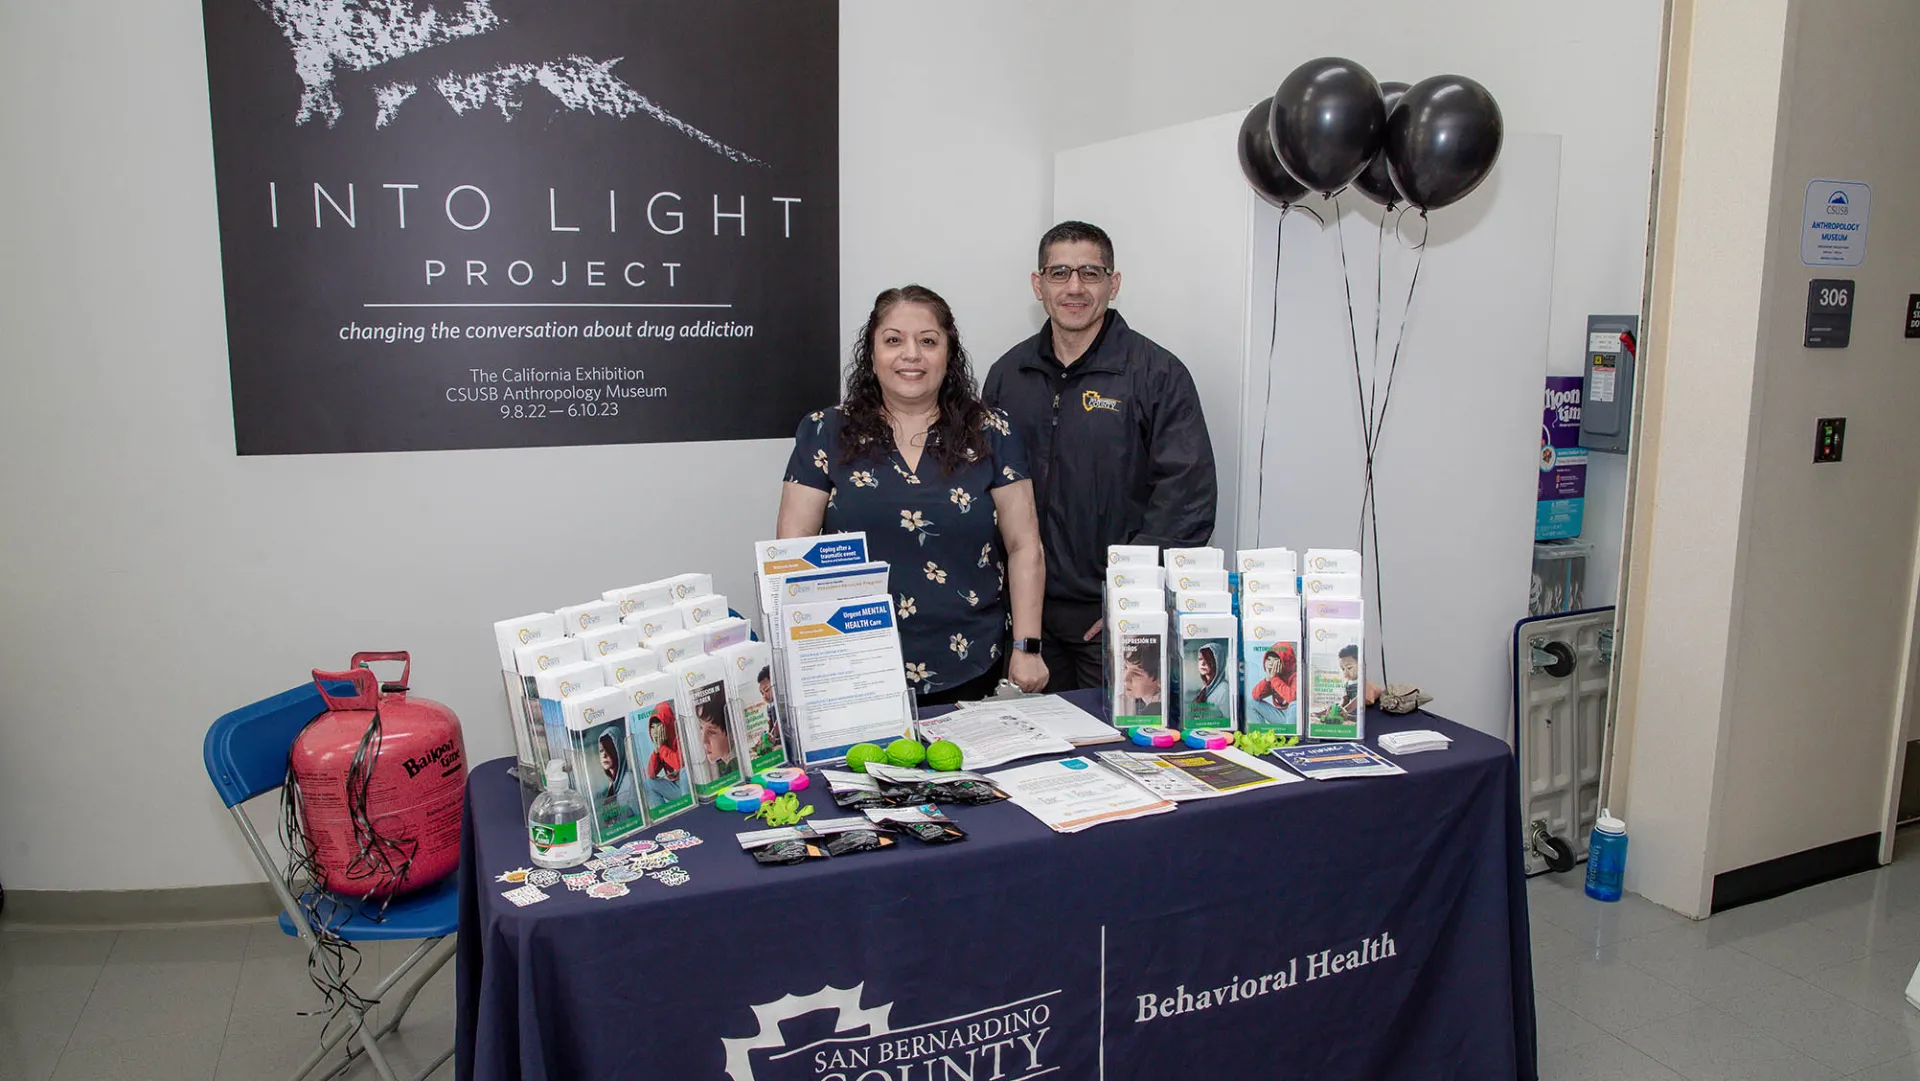 San Bernardino County Social Services staff members Monica Rosas (left) and Daniel Mendez met with students, staff and faculty in CSUSB’s Anthropology Museum during Black Balloon Day, an event that brought awareness to the dangers of drug overdoses and substance use disorder.